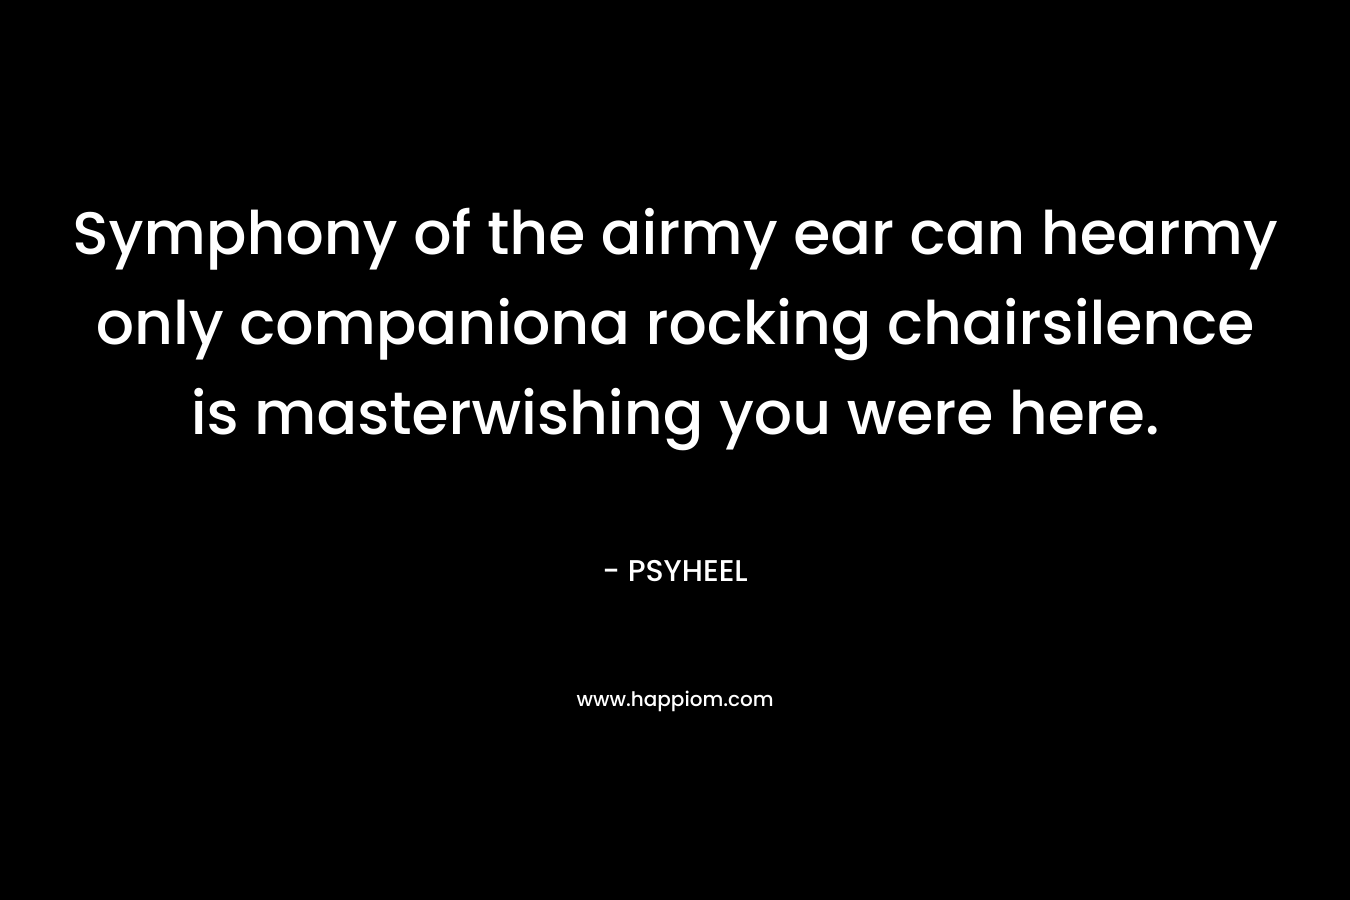 Symphony of the airmy ear can hearmy only companiona rocking chairsilence is masterwishing you were here. – PSYHEEL